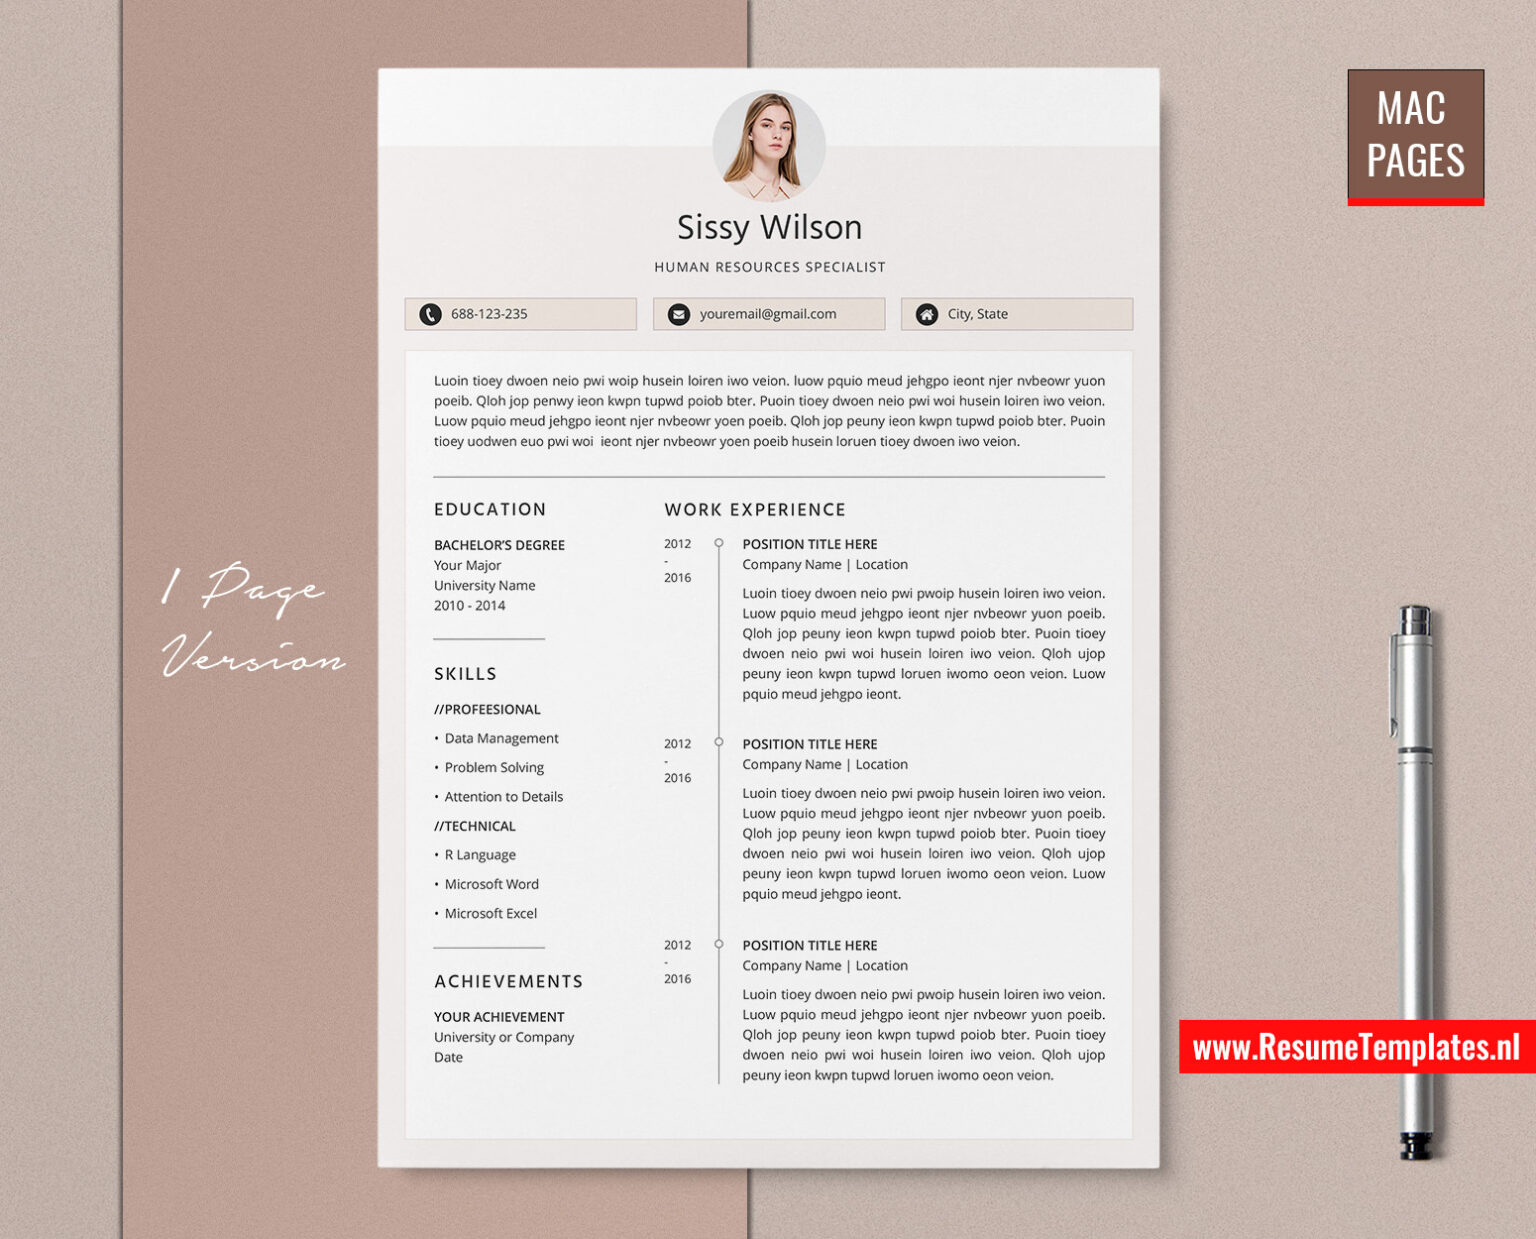 for-mac-pages-modern-cv-template-resume-template-for-mac-pages-with-cover-letter-and